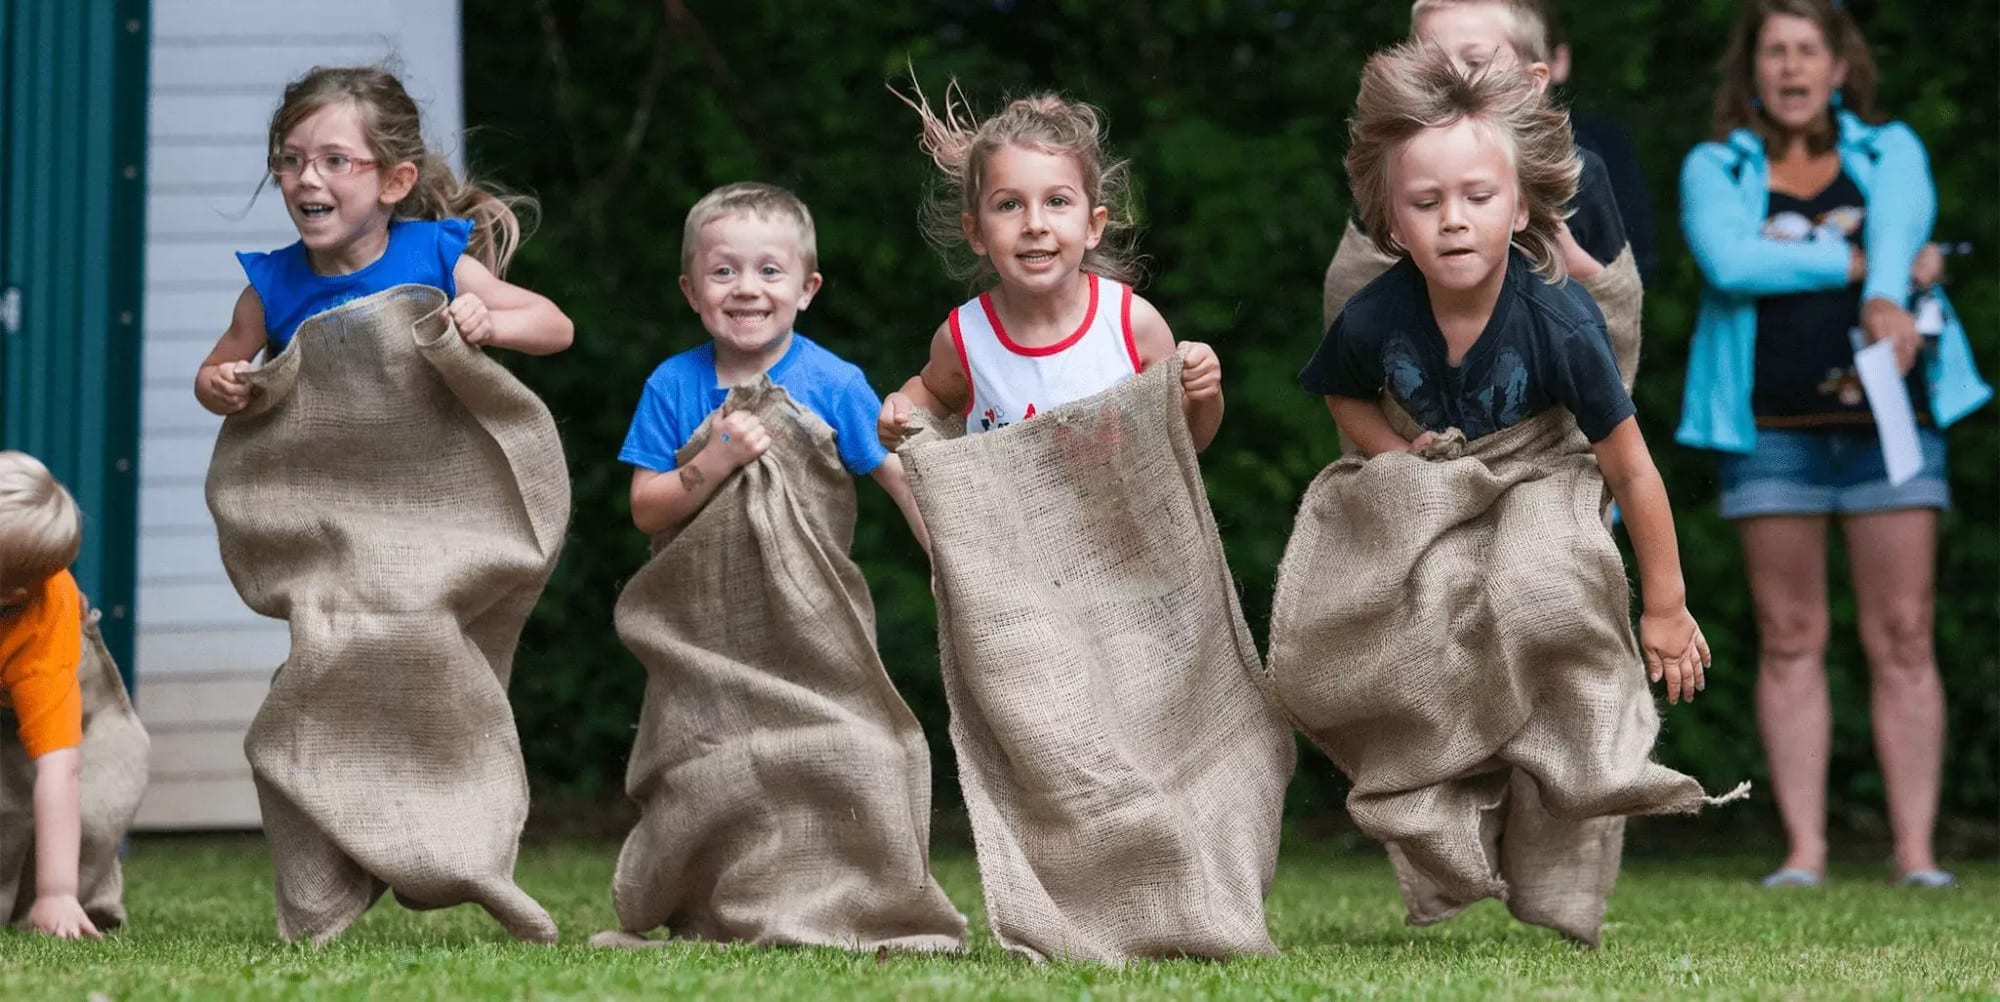 Children competing in a sack race